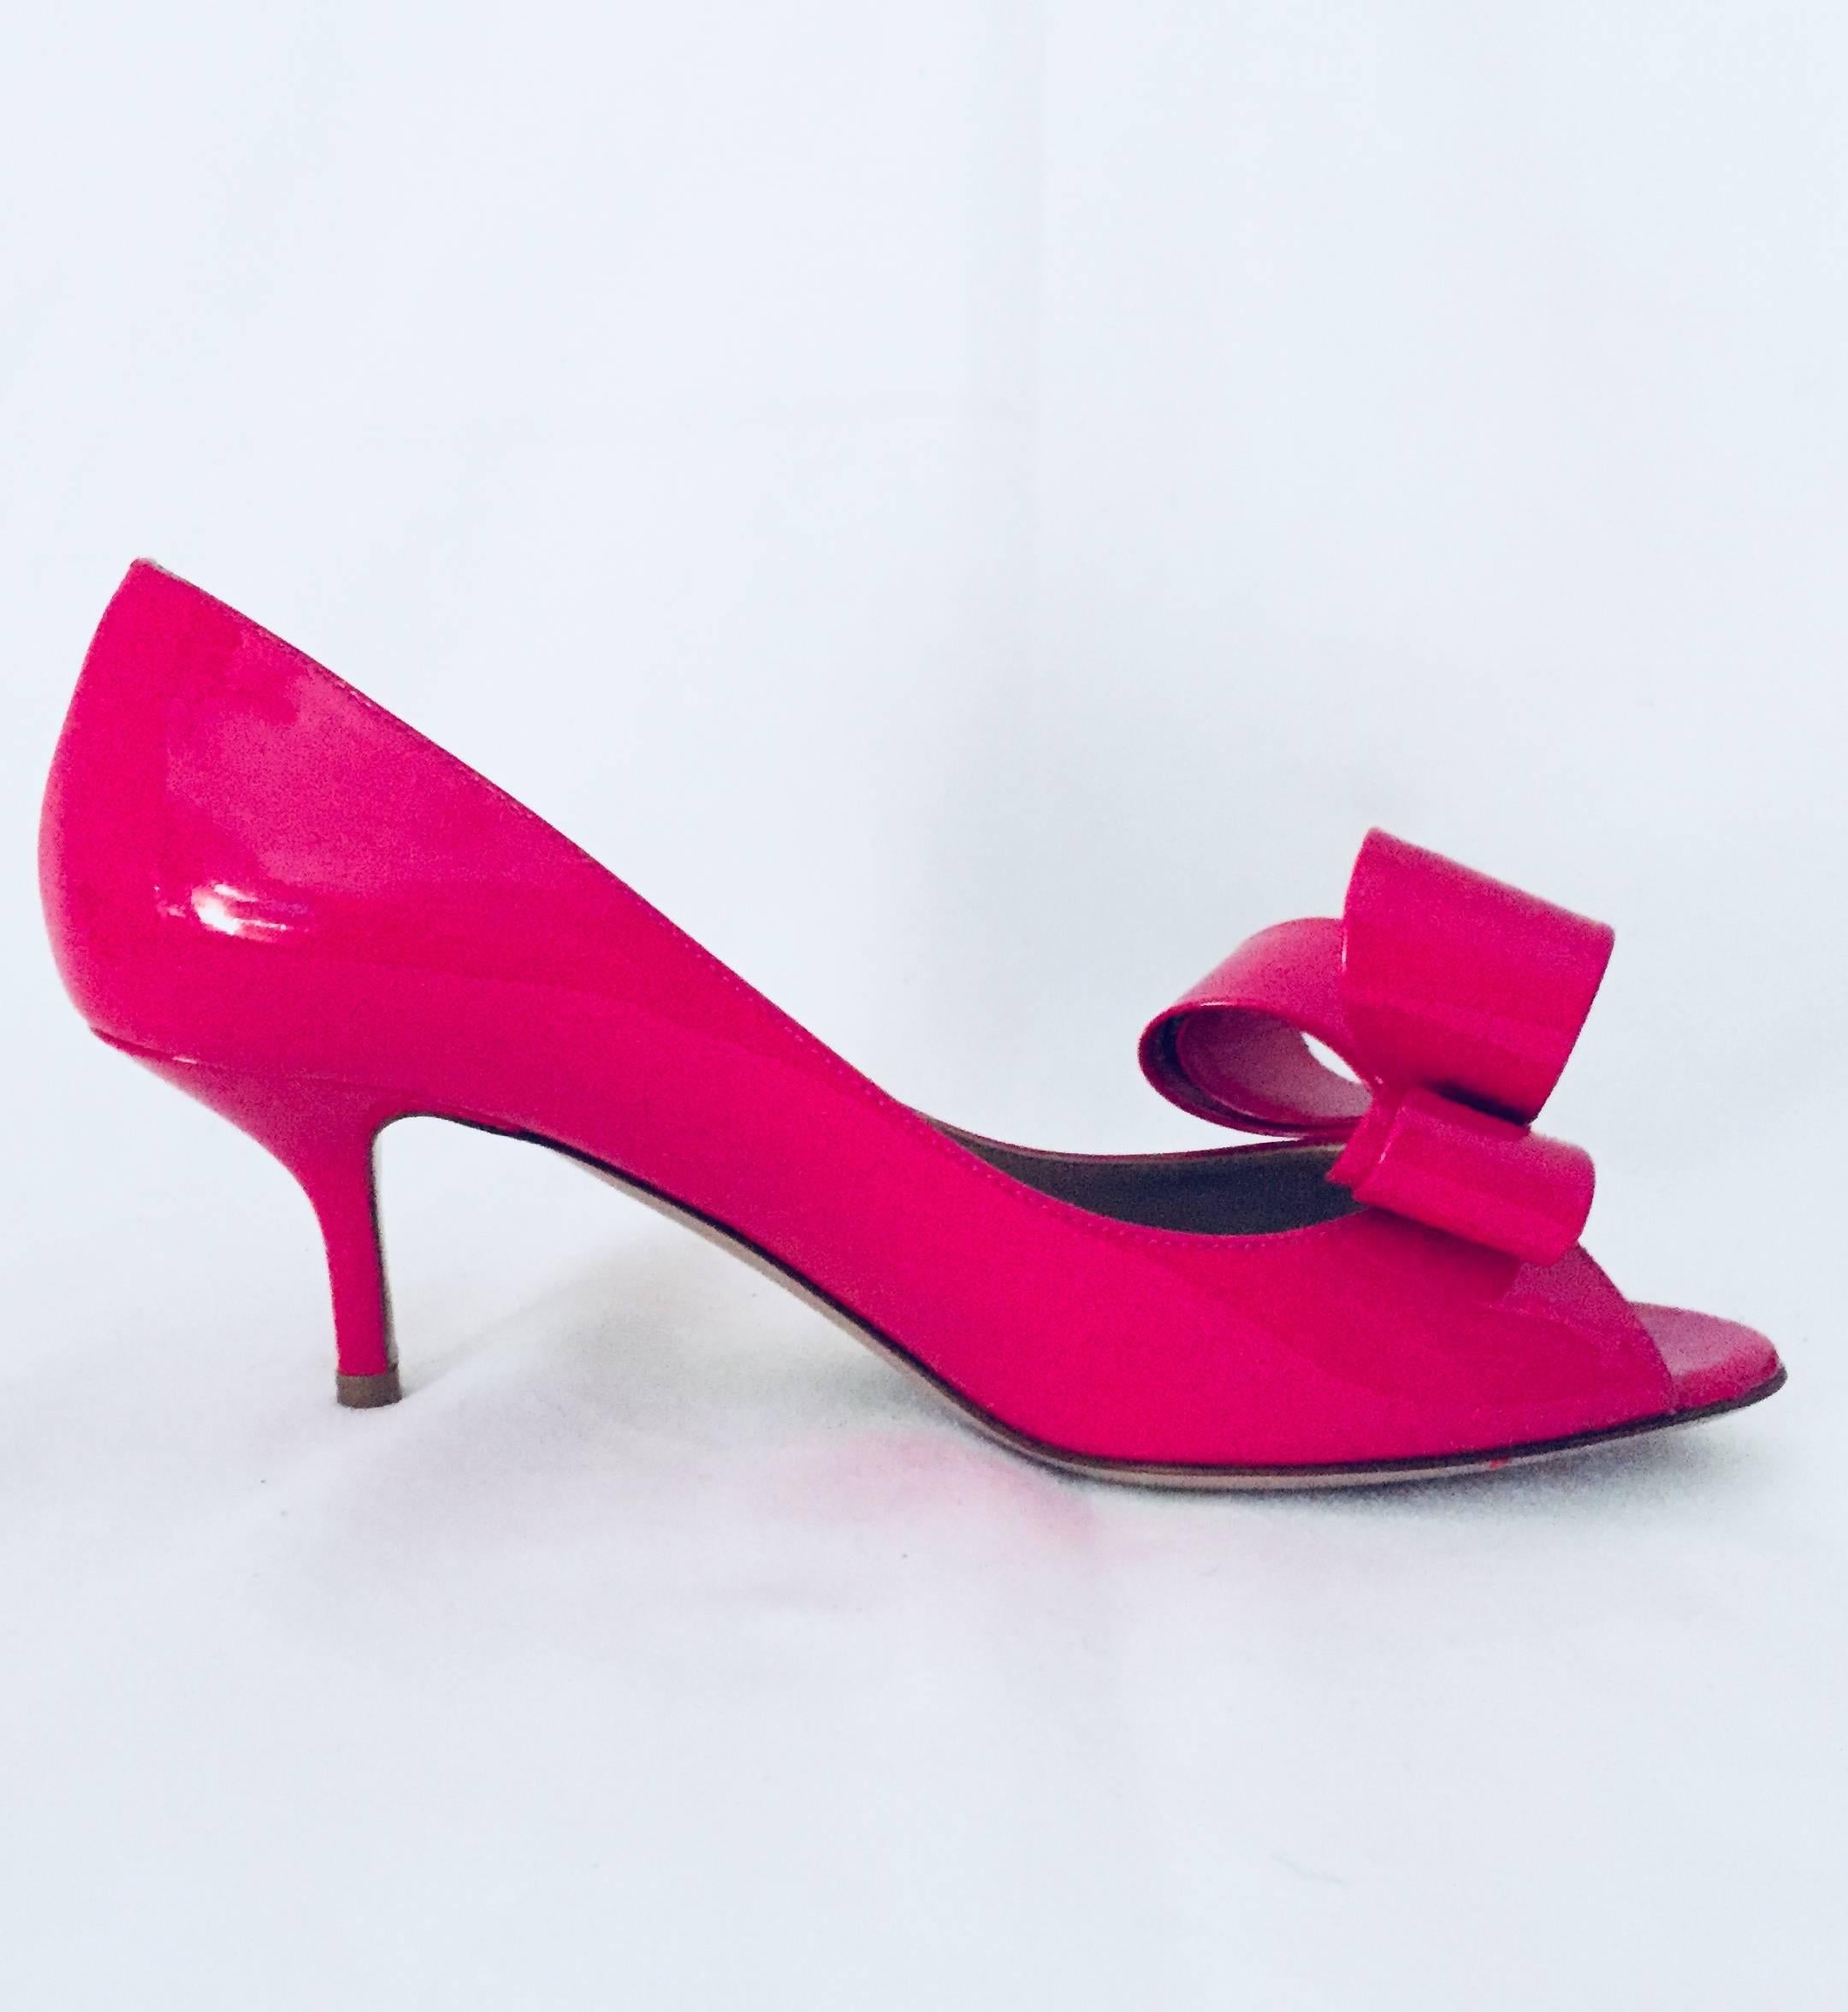 Fuchsia Patent Leather Peep Toe Low Pumps are quintessential Garavani!  Leather soles, insoles and lining.  Feminine to a fault, these pumps are finished with signature Valentino Bows.  Excellent Condition.  Limited Wear With Original Box.  Heel